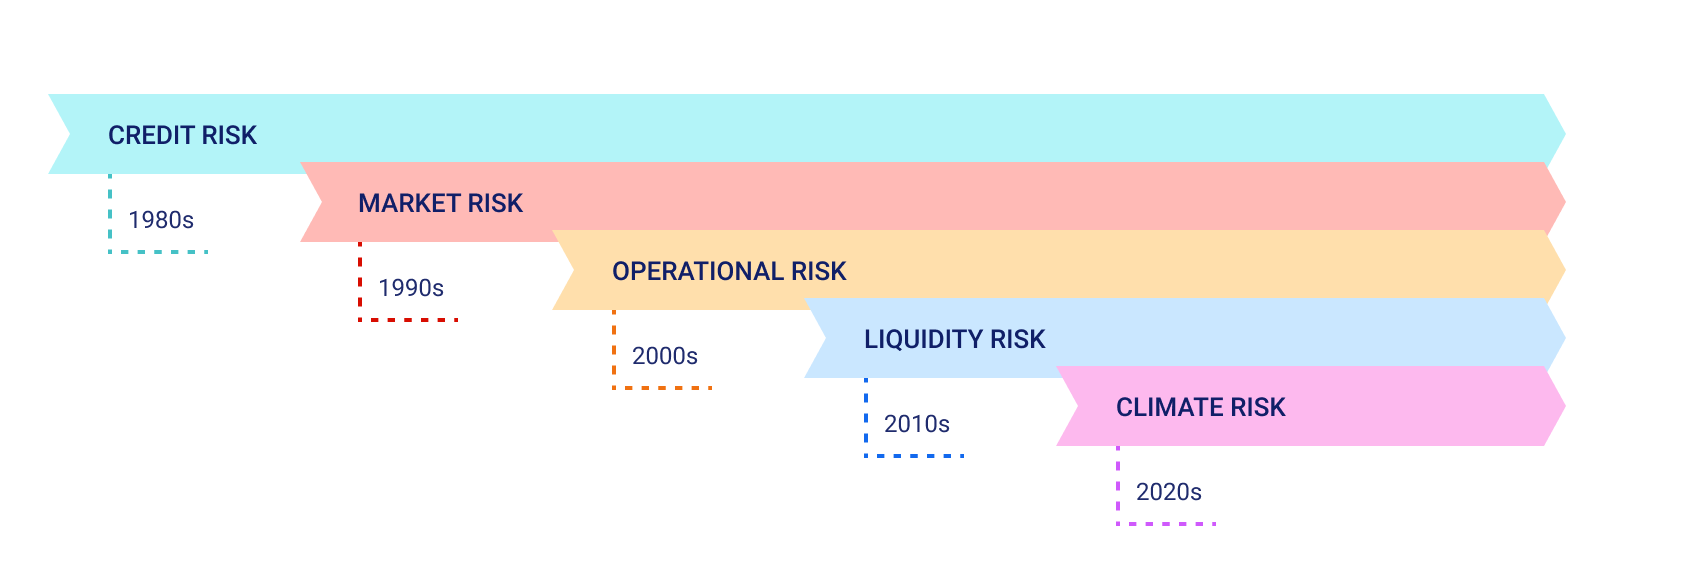 Types of risk and risk management approaches from the Global Association of Risk Professionals